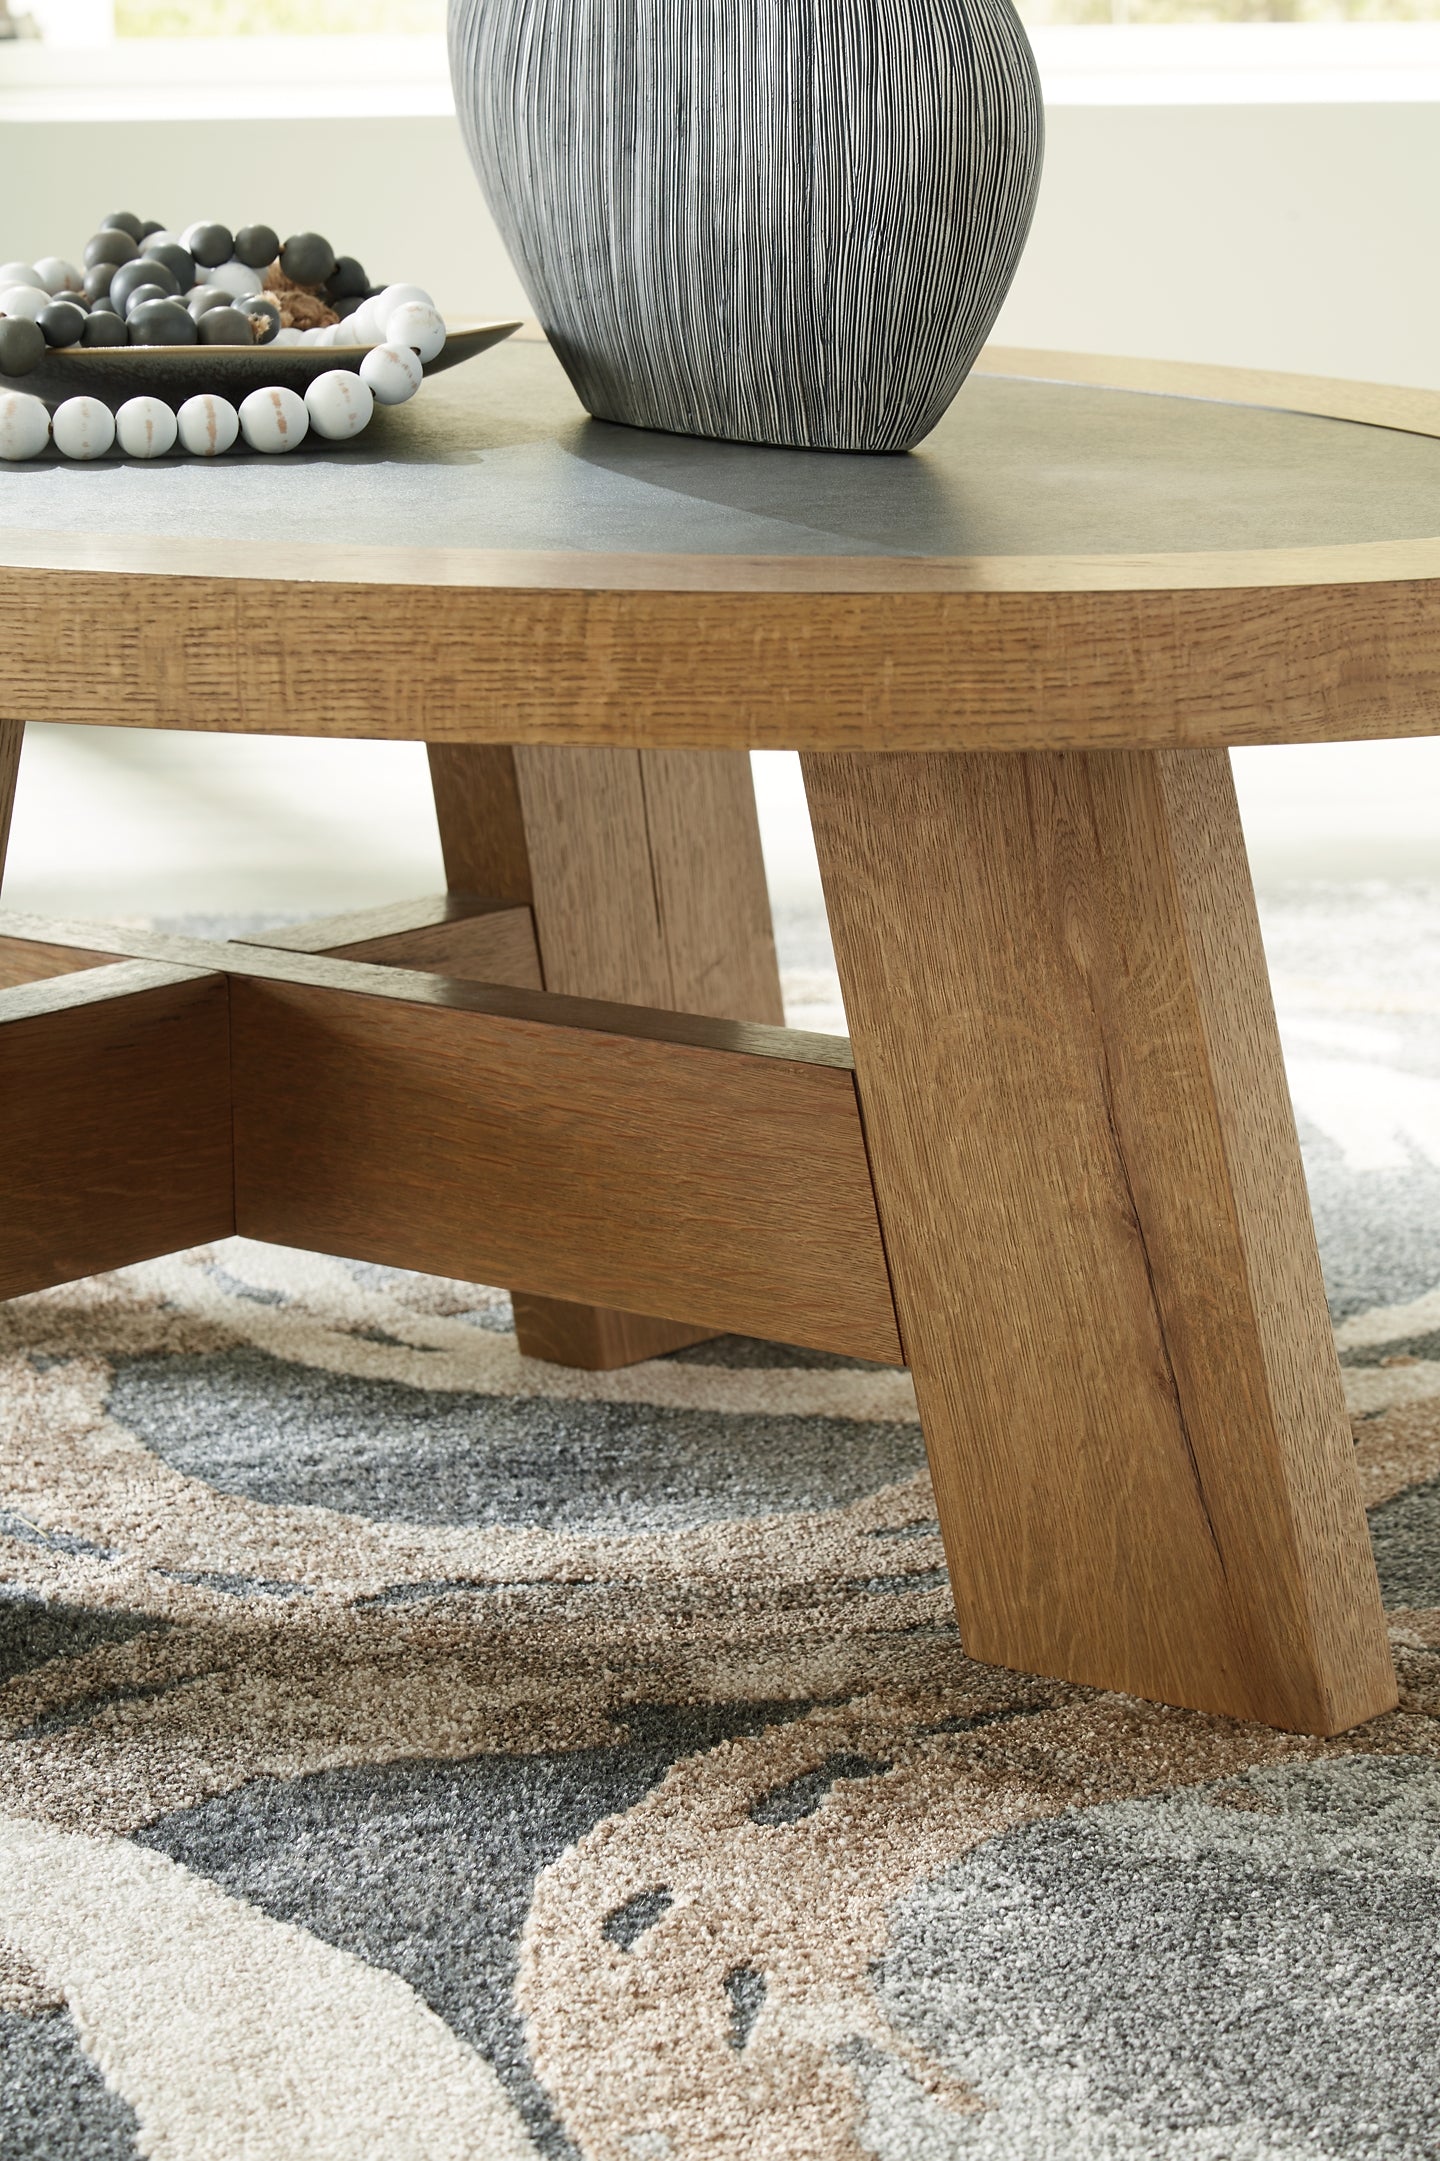 Brinstead Coffee Table with 1 End Table Signature Design by Ashley®